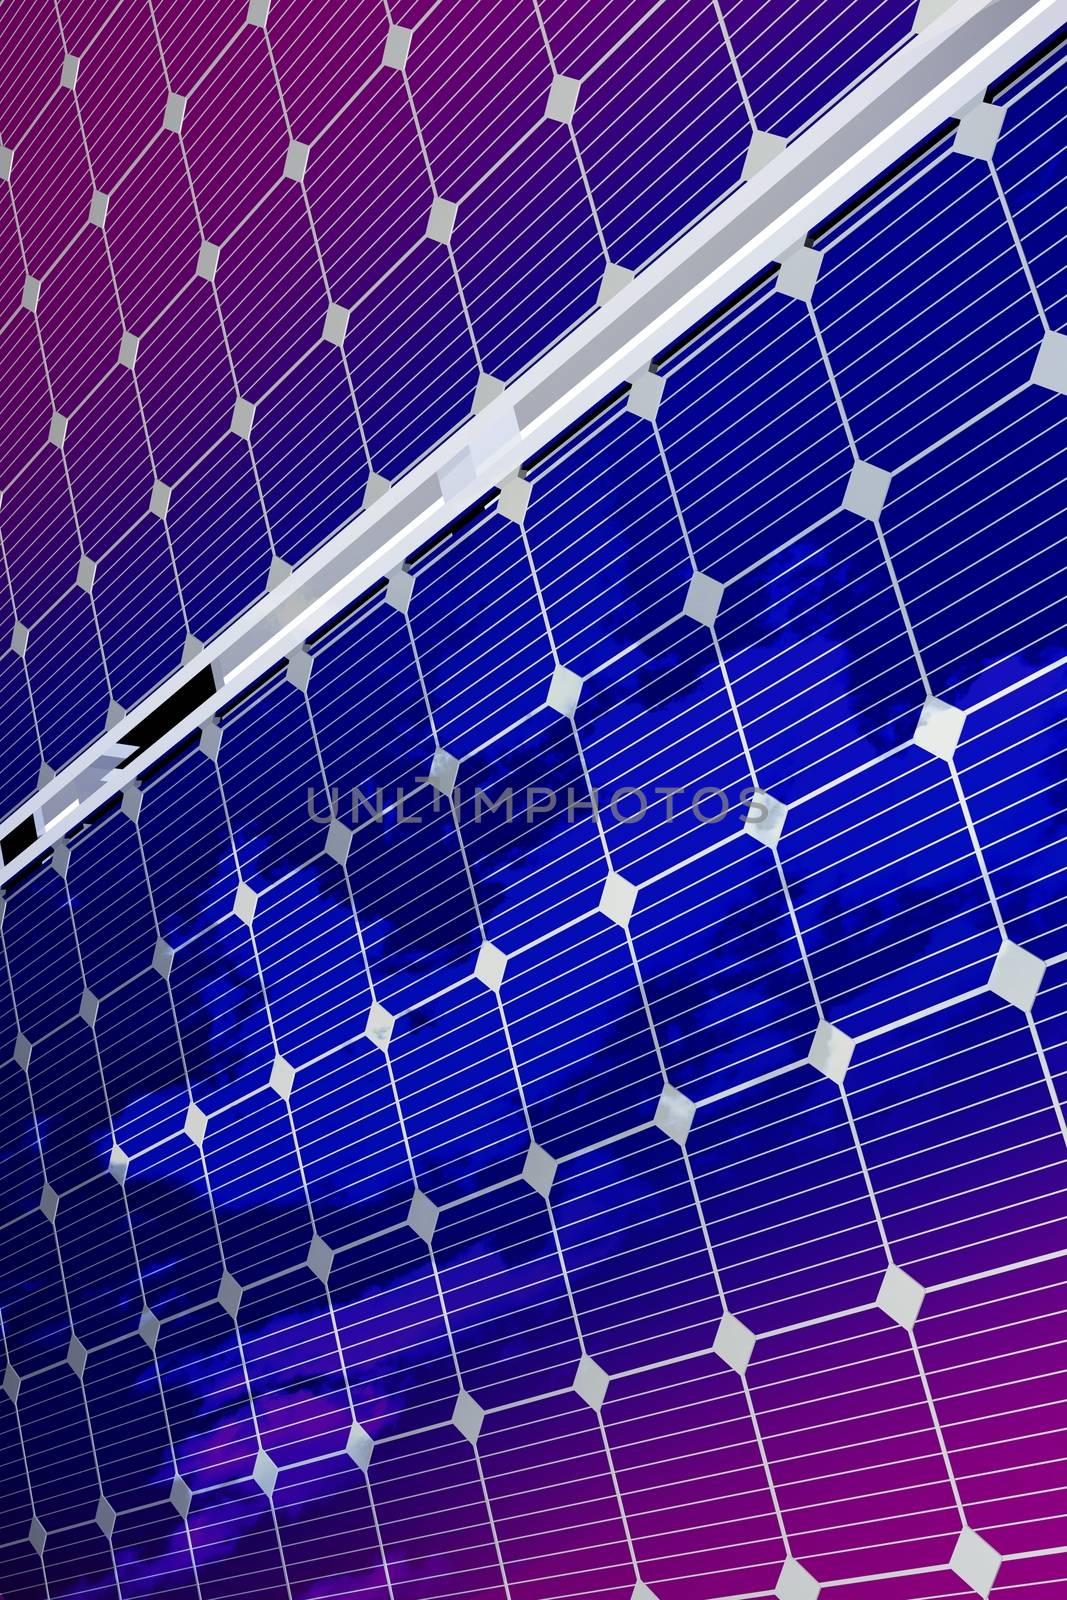 Renewable Energy - Solar Panels Background. 3D Rendered Solar Panels with Sky Reflections. Vertical Background. Renewable Energy Theme.